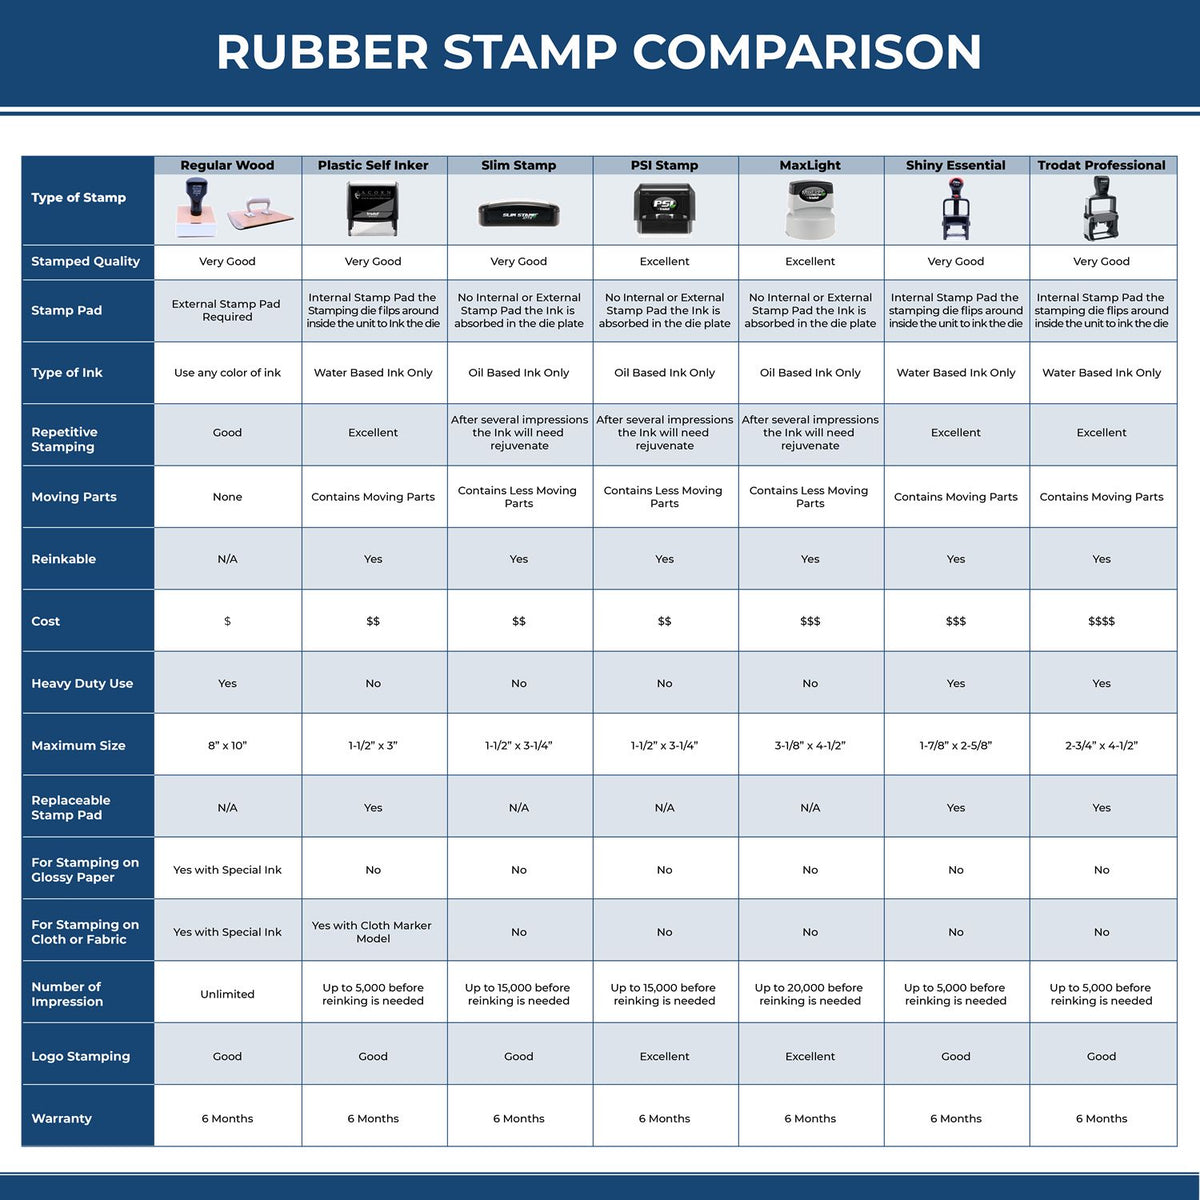 A comparison chart for the different types of mount models available for the Wooden Handle Nebraska State Seal Notary Public Stamp.